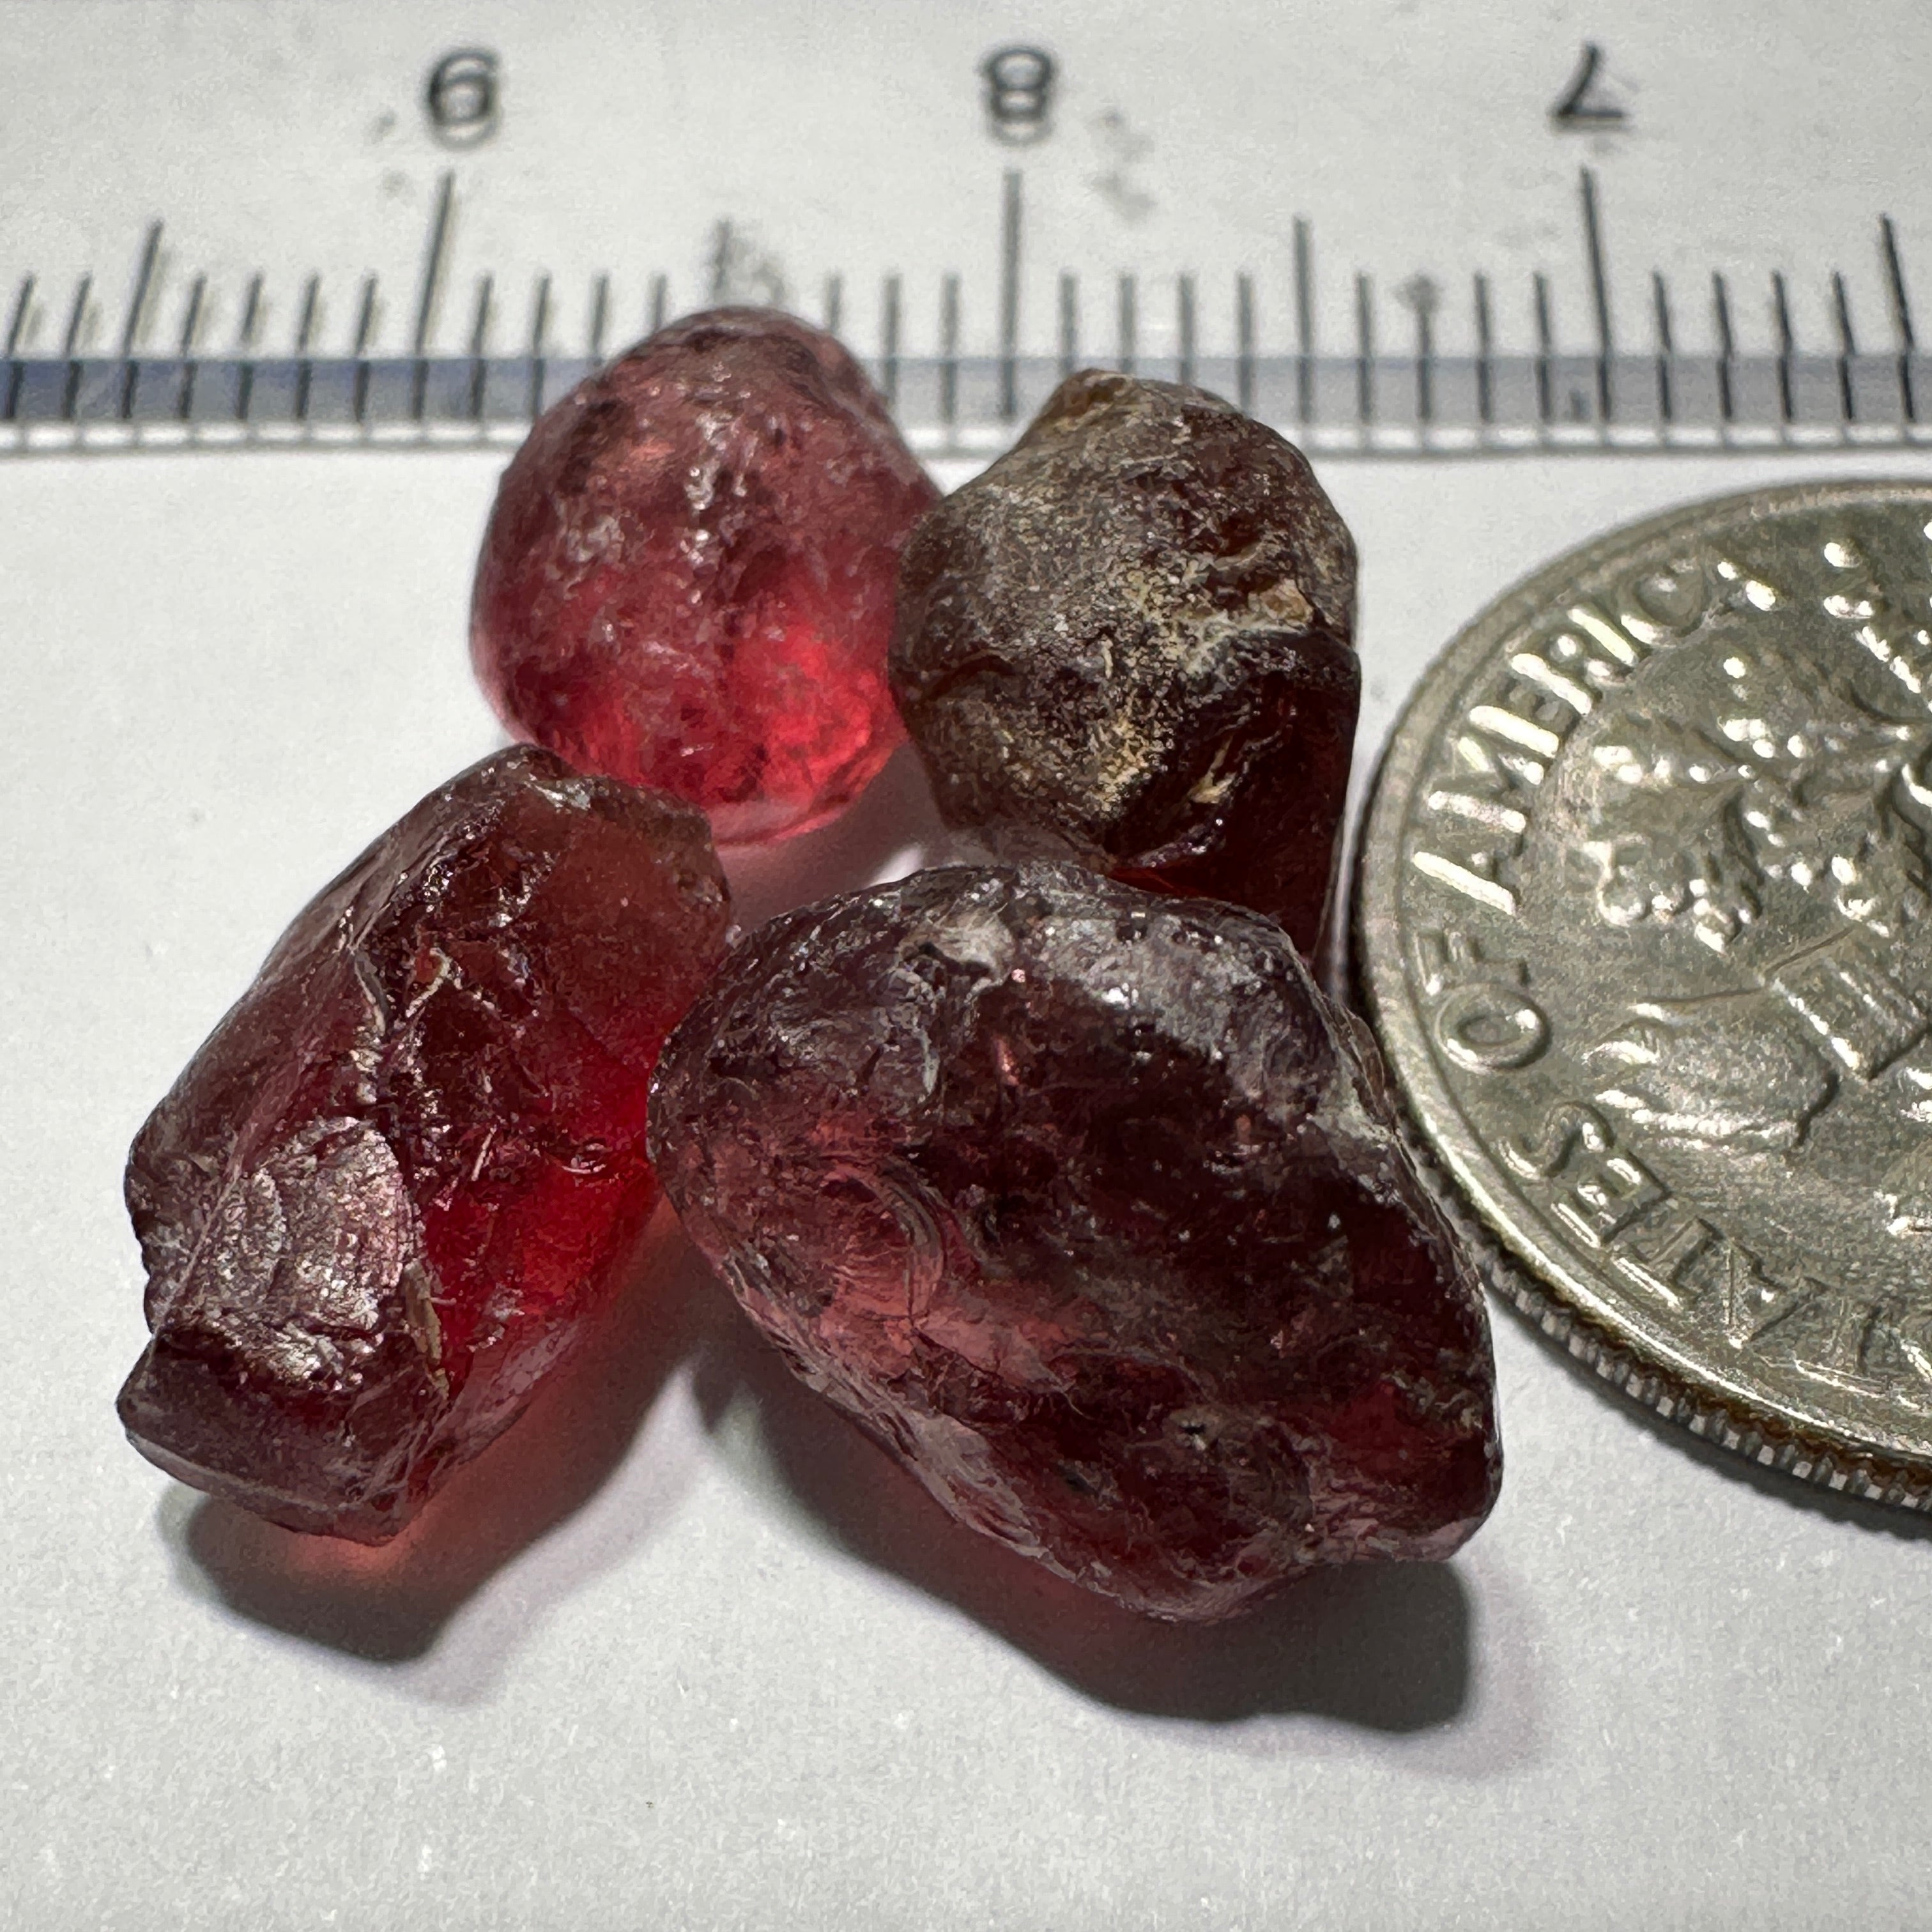 20.79ct Champagne Garnet Lot, Tanzania. 3.91ct-7.13ct. Included, Untreated Unheated